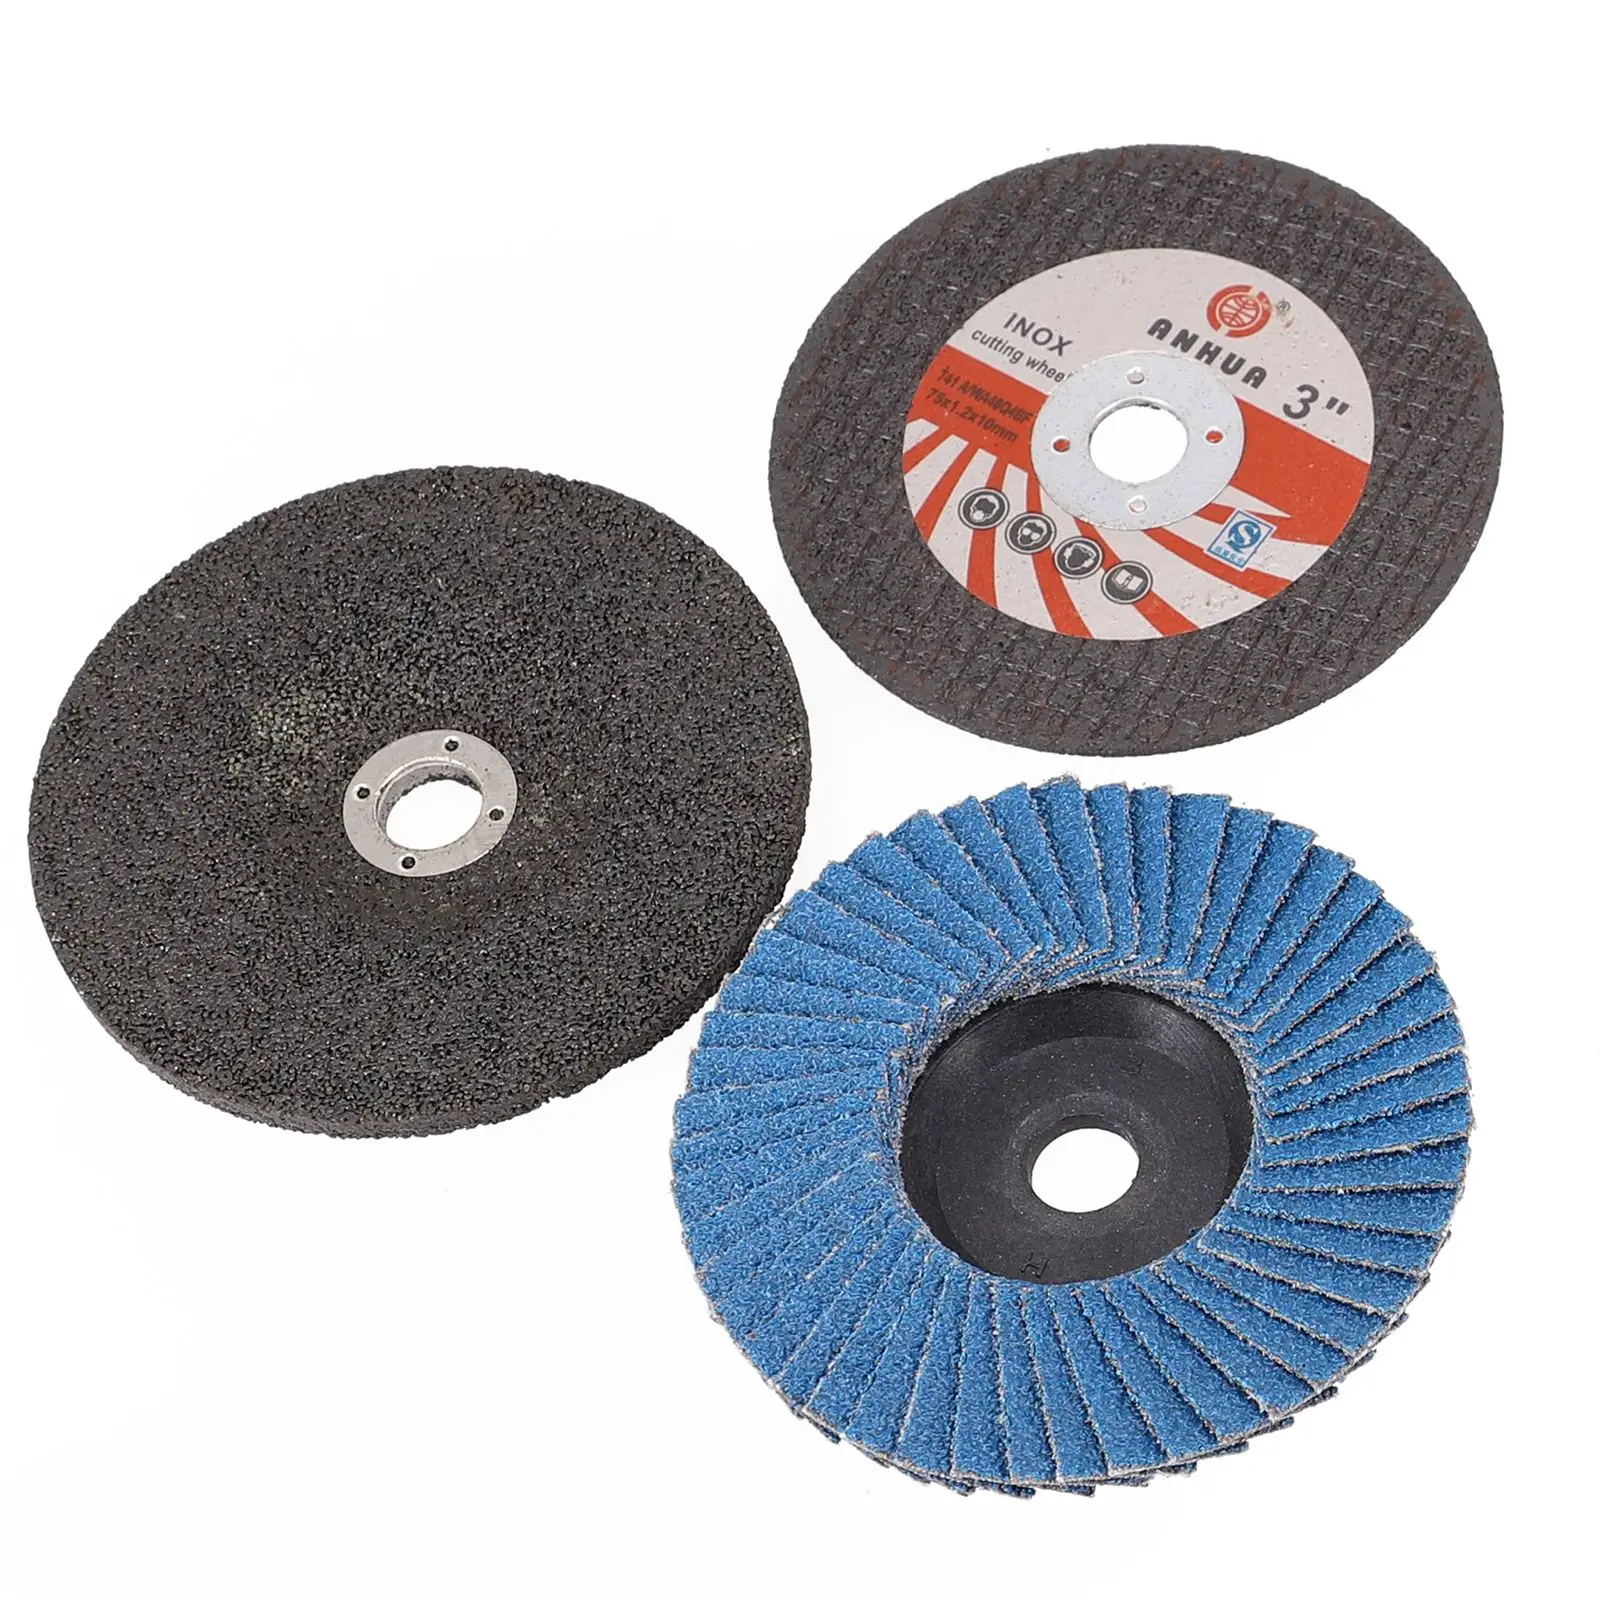 Brand New Cutting Disc Grinding Wheel Circular Saw Blade For Angle Grinder For Ceramic Tile Wood Polishing Disc diamond grinding wheel for carbide tungsten circular saw blade grinding disc rake face angle on cnc sharpener grinder machine